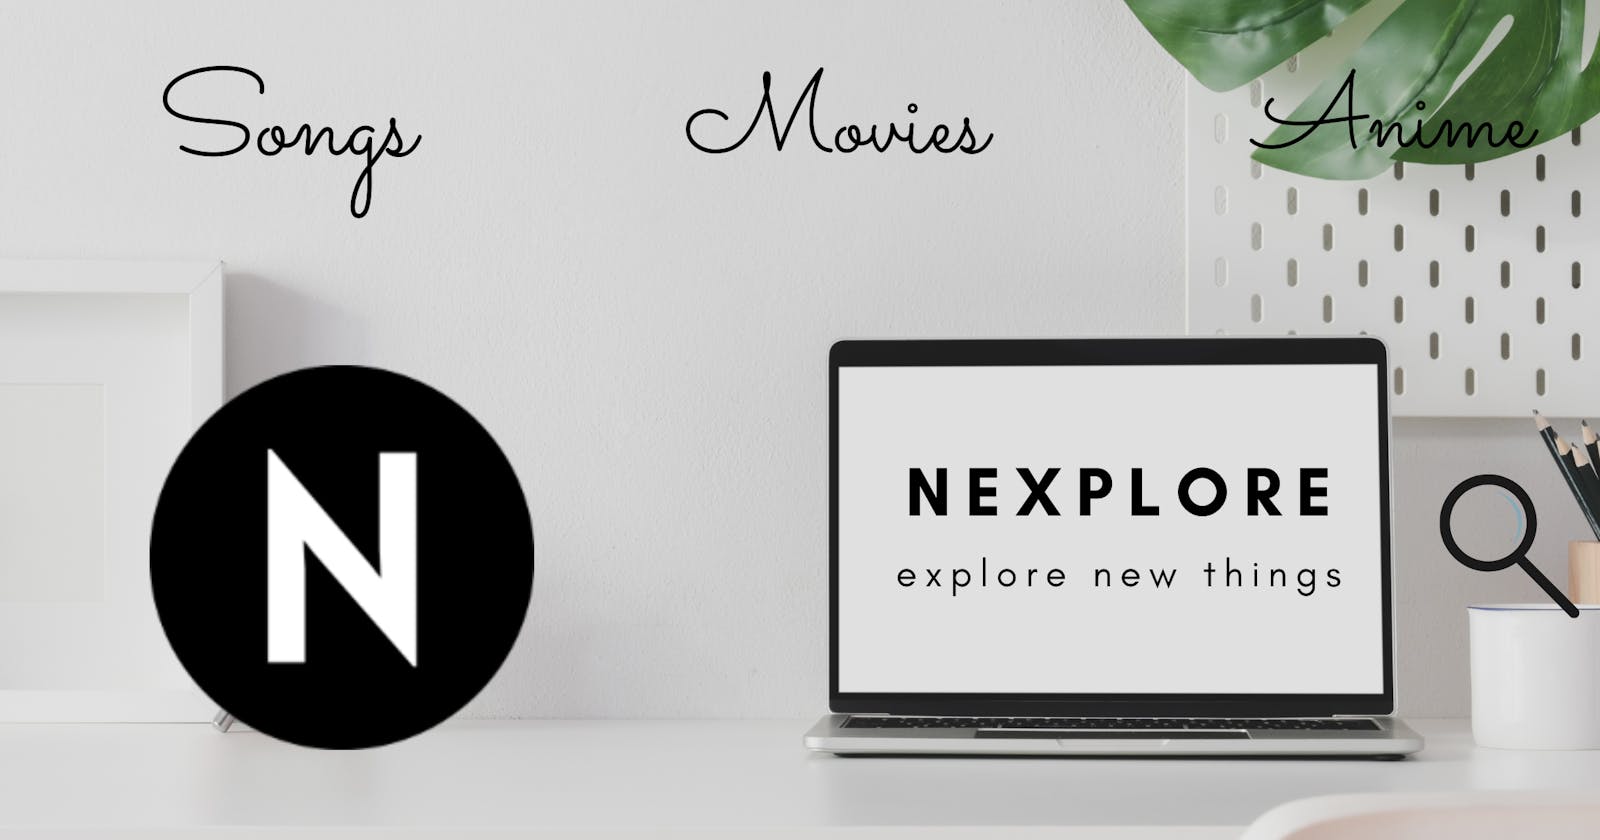 Introducing Nexplore: a way to explore new recommendations.